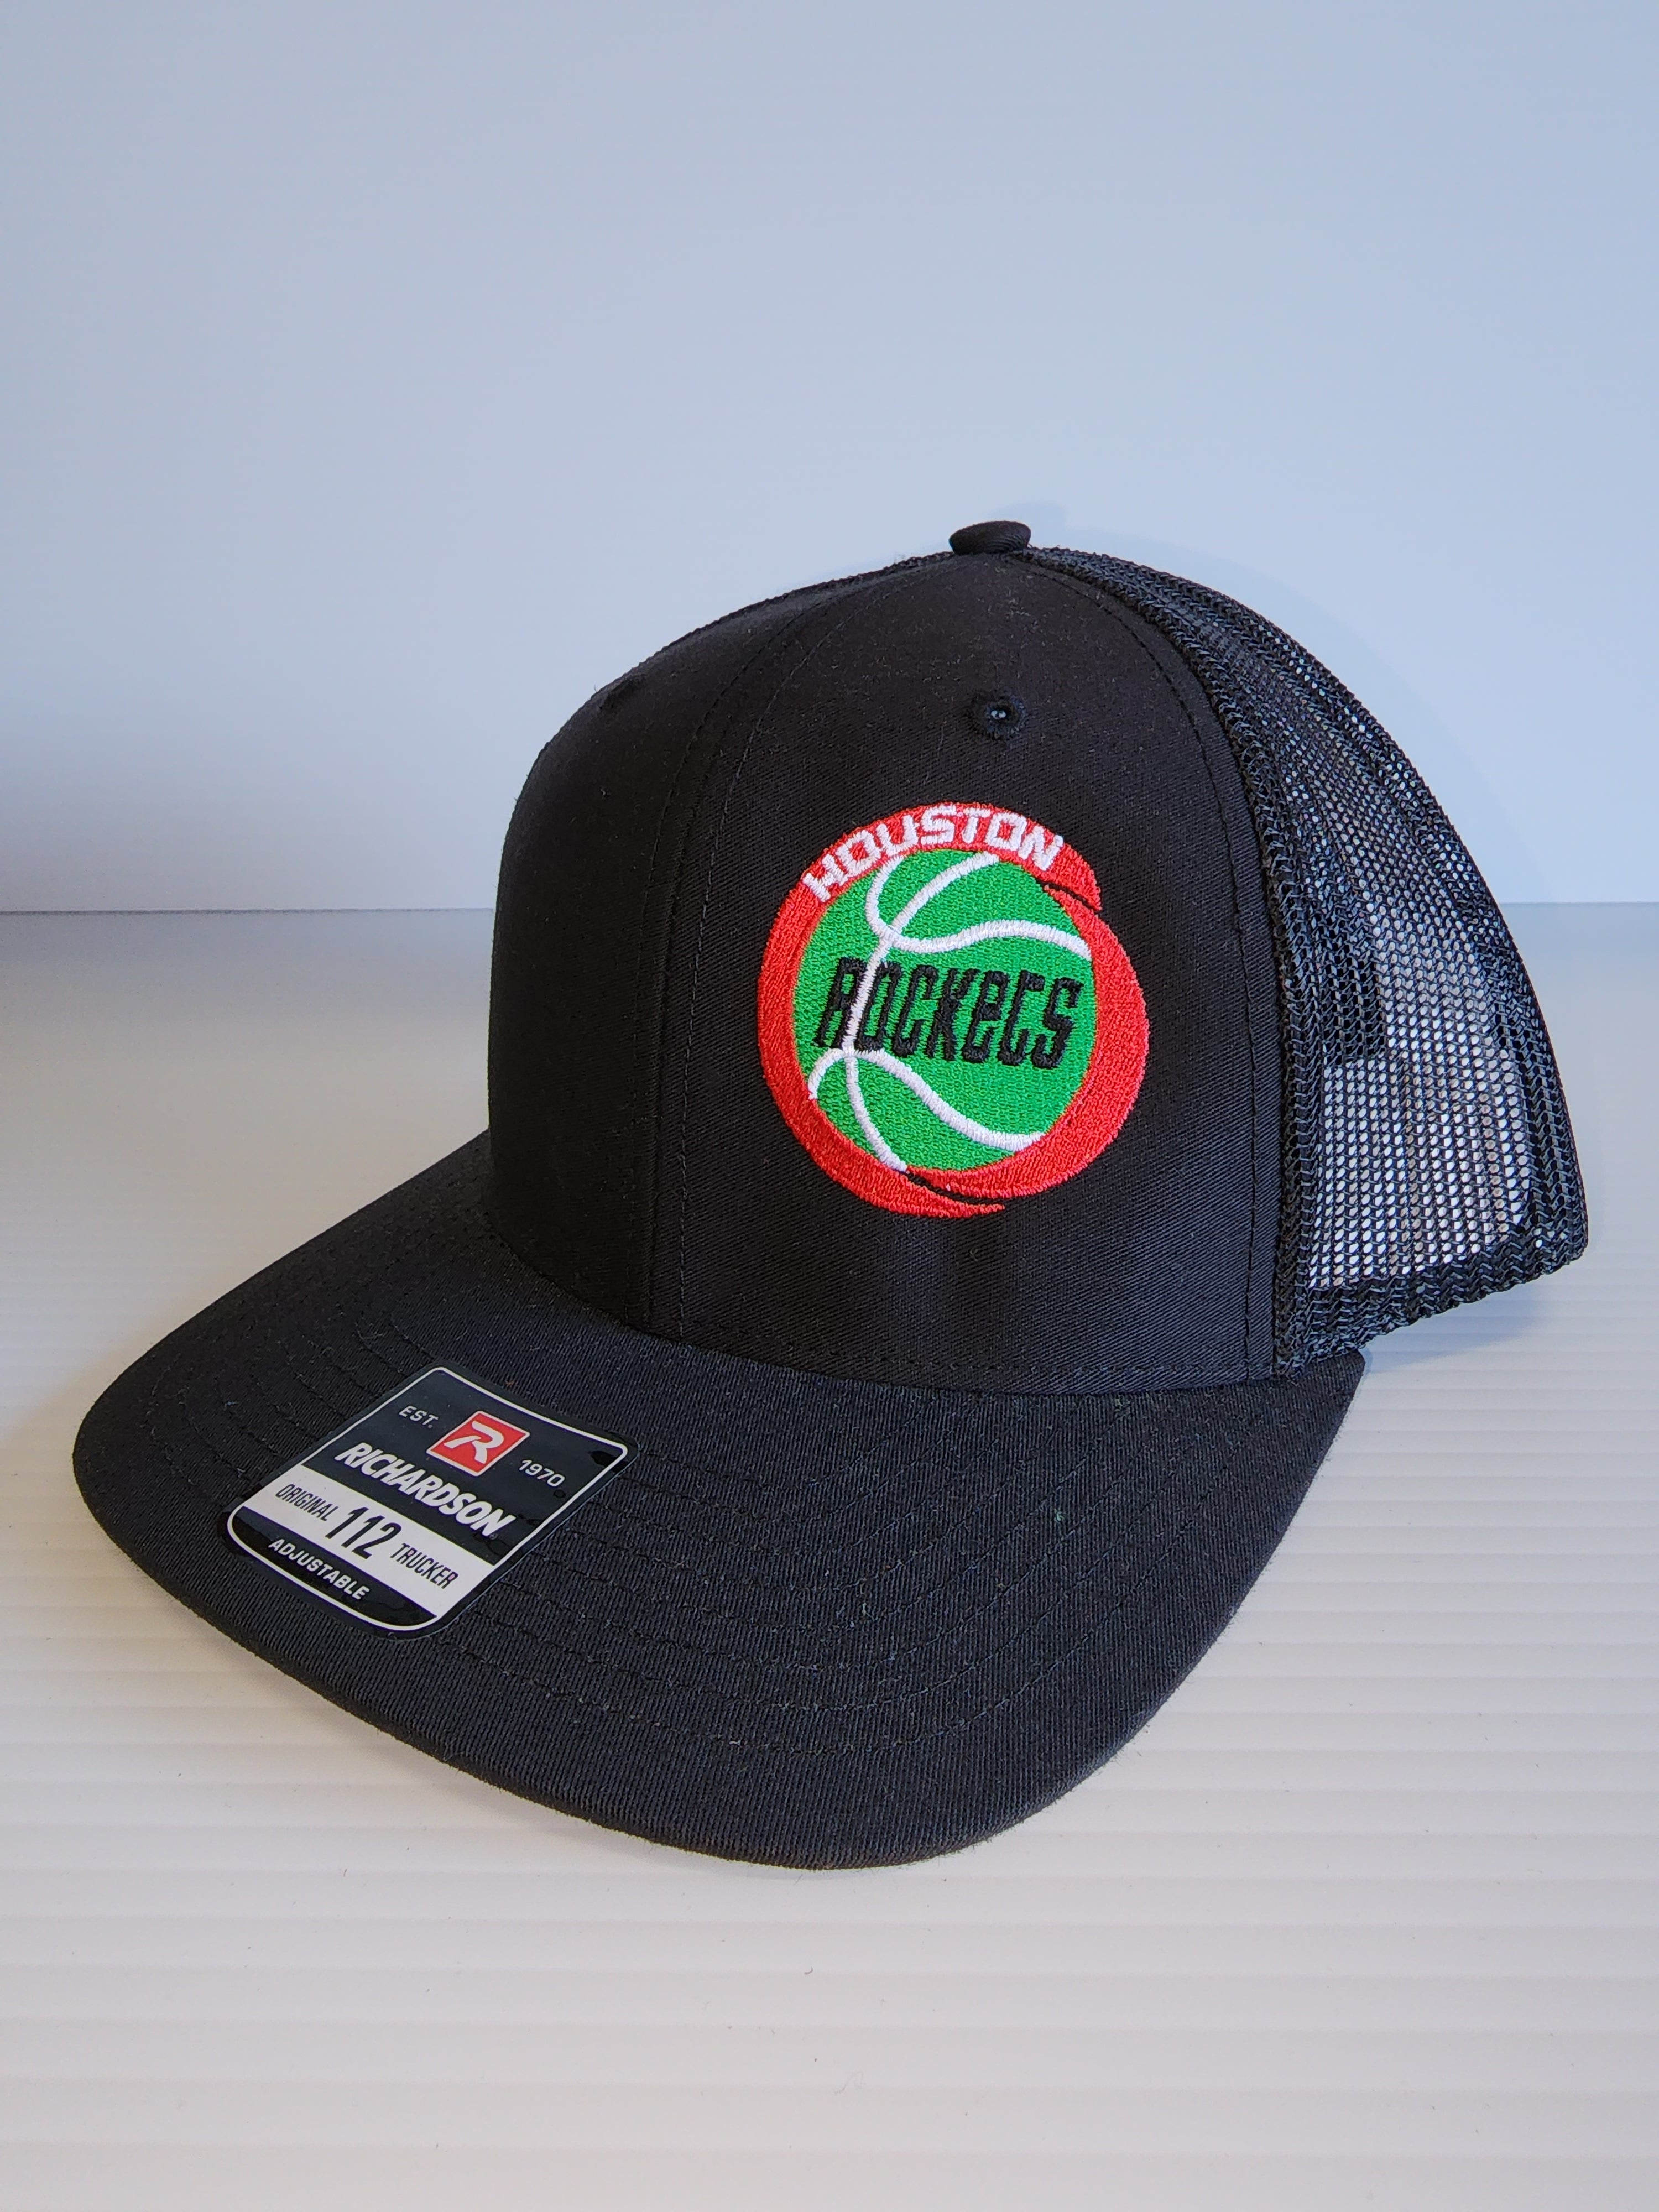 Houston Rockets Mexico Themed Black Trucker Cap with Mexican Flag on the back